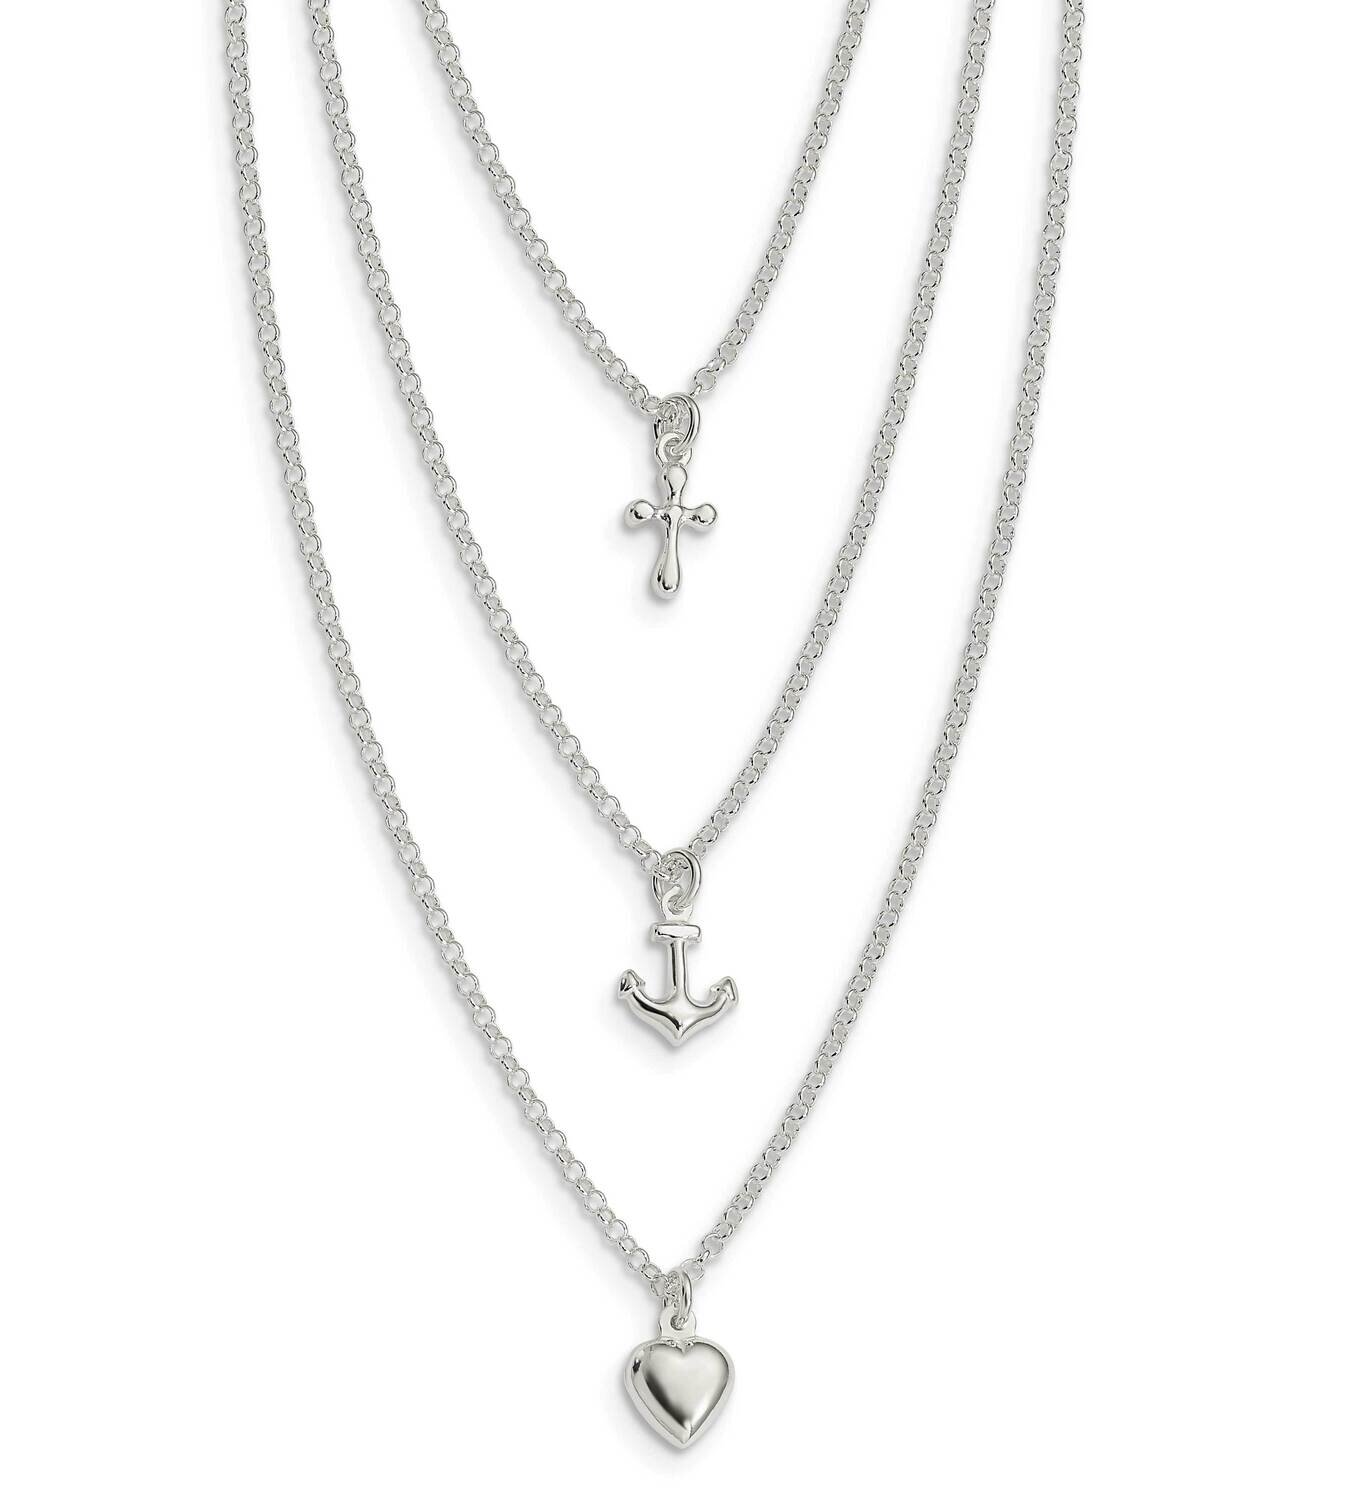 Cross, Anchor, Heart Multi Strand Necklace 16 Inch Sterling Silver QG6047-16